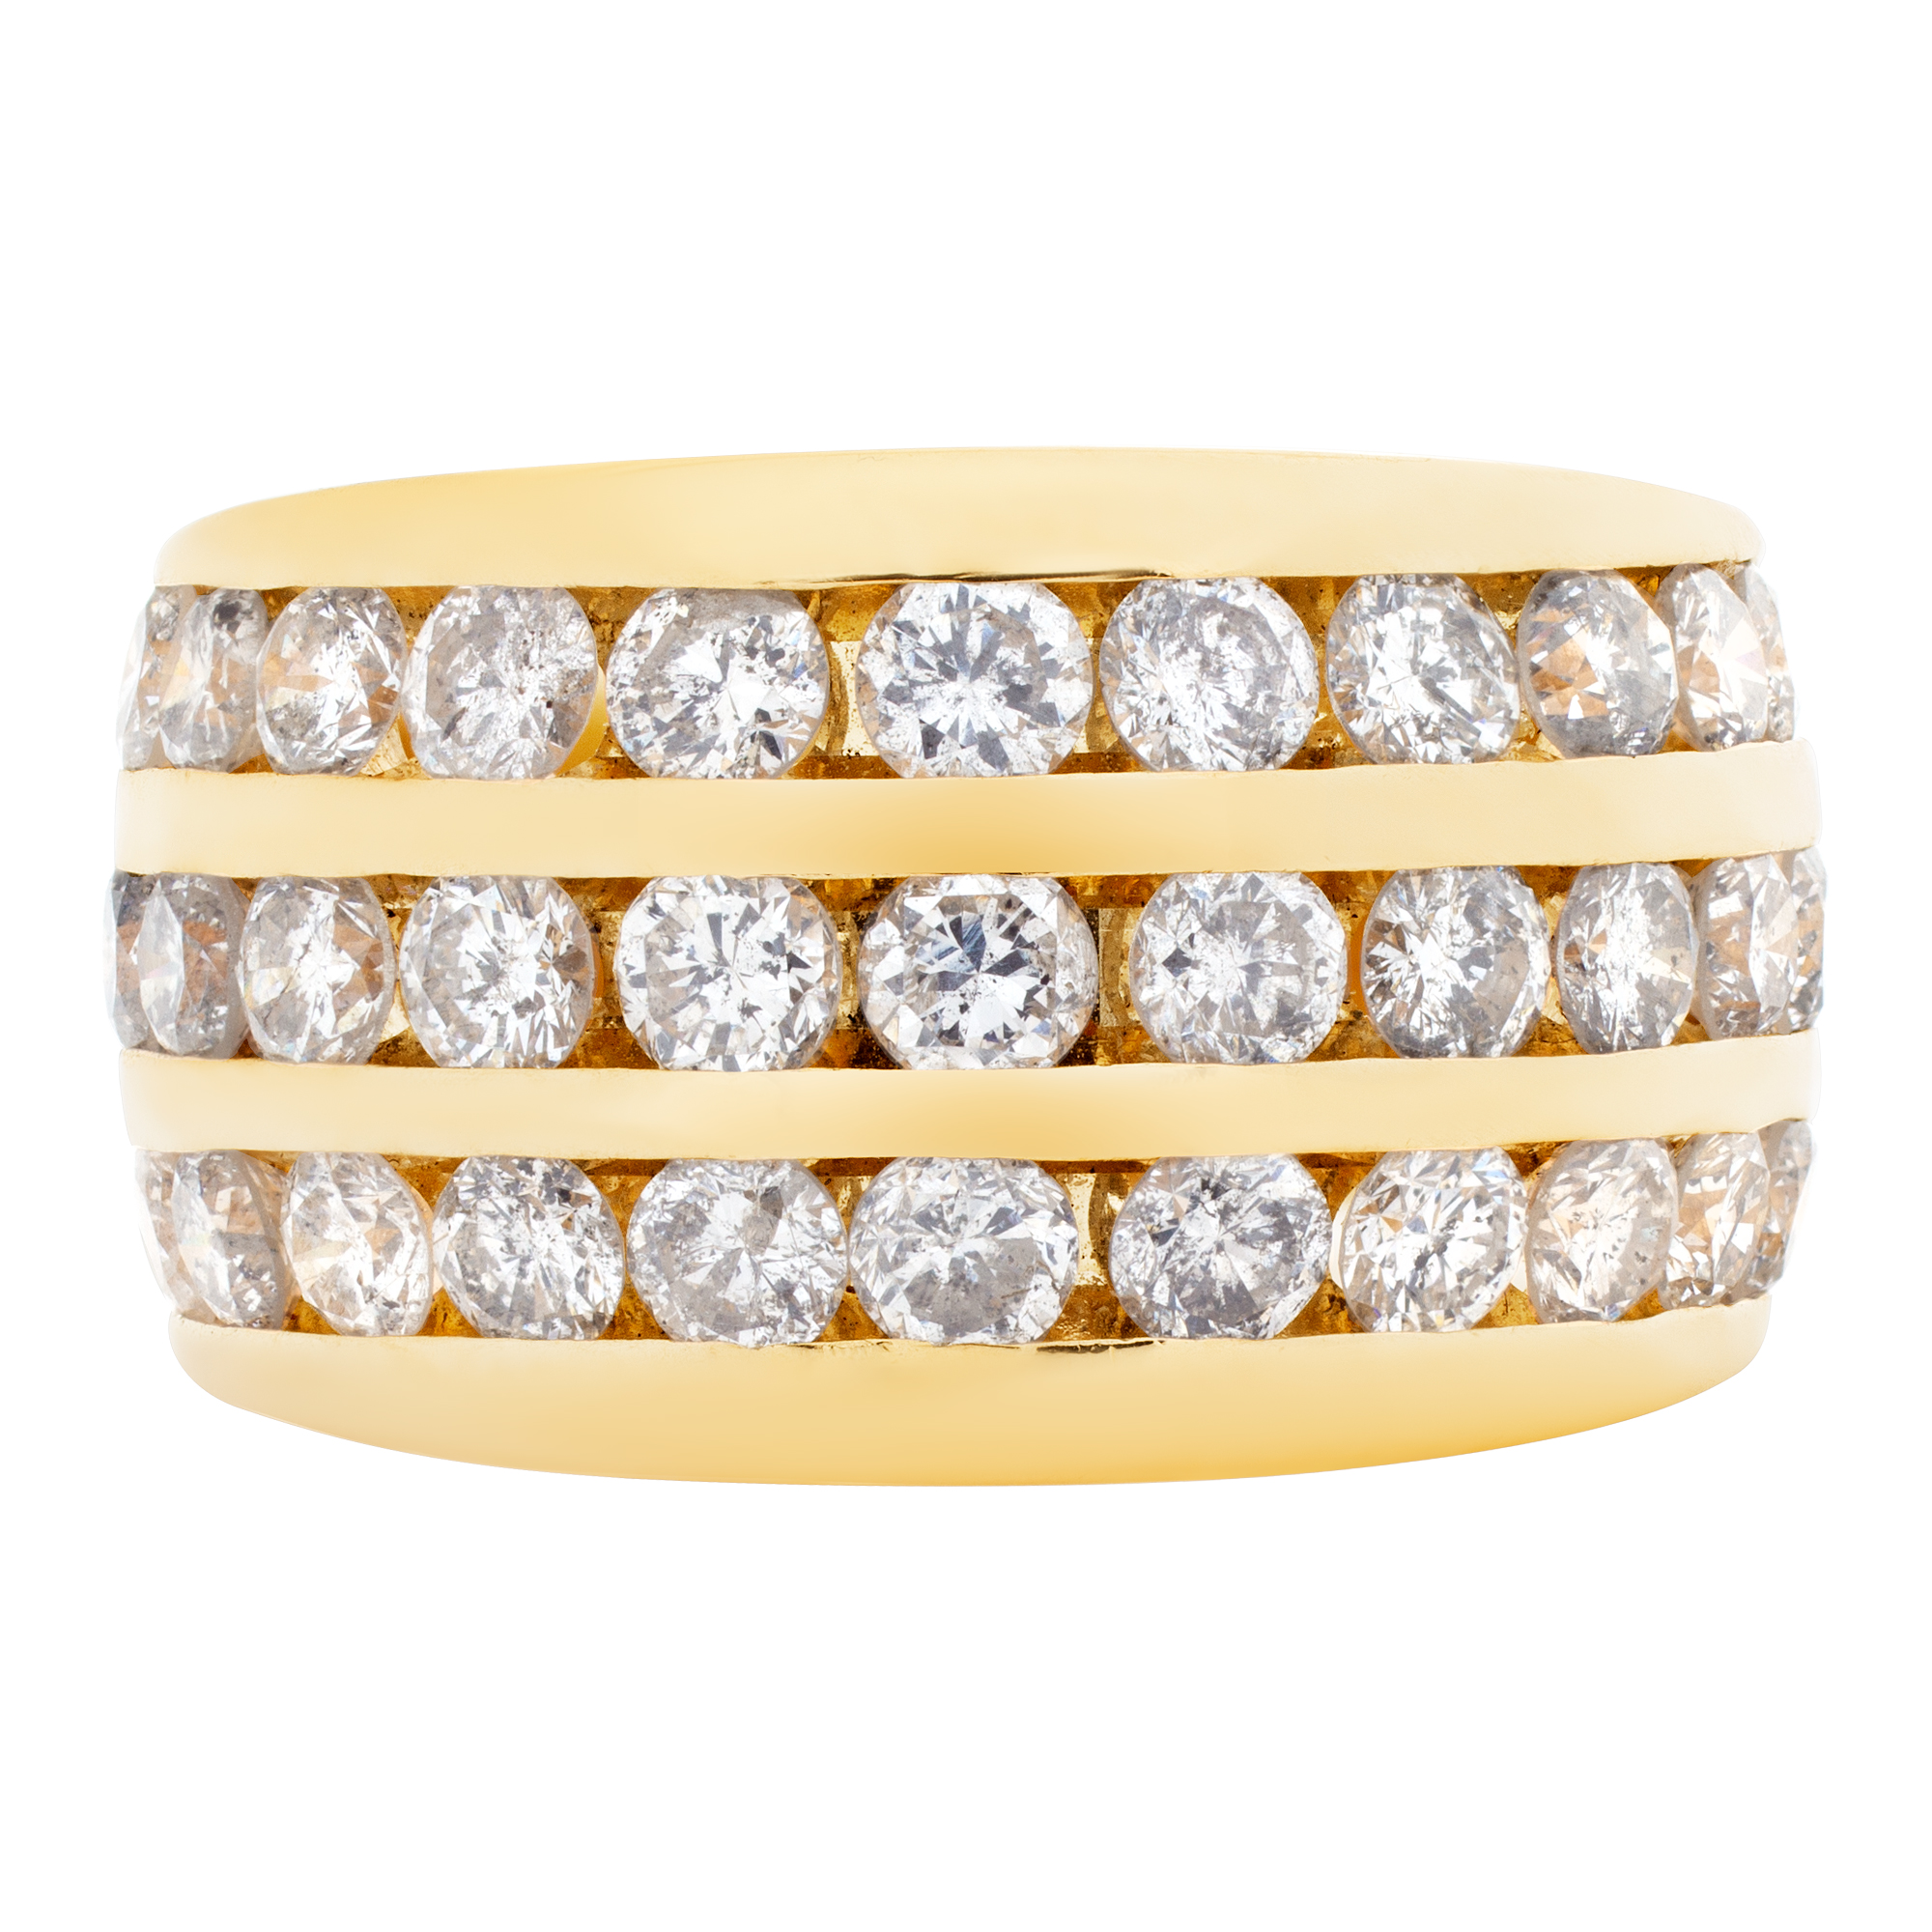 Wide band in 14k yellow gold. 1.50 carats in 3 rows of channel set diamonds image 2